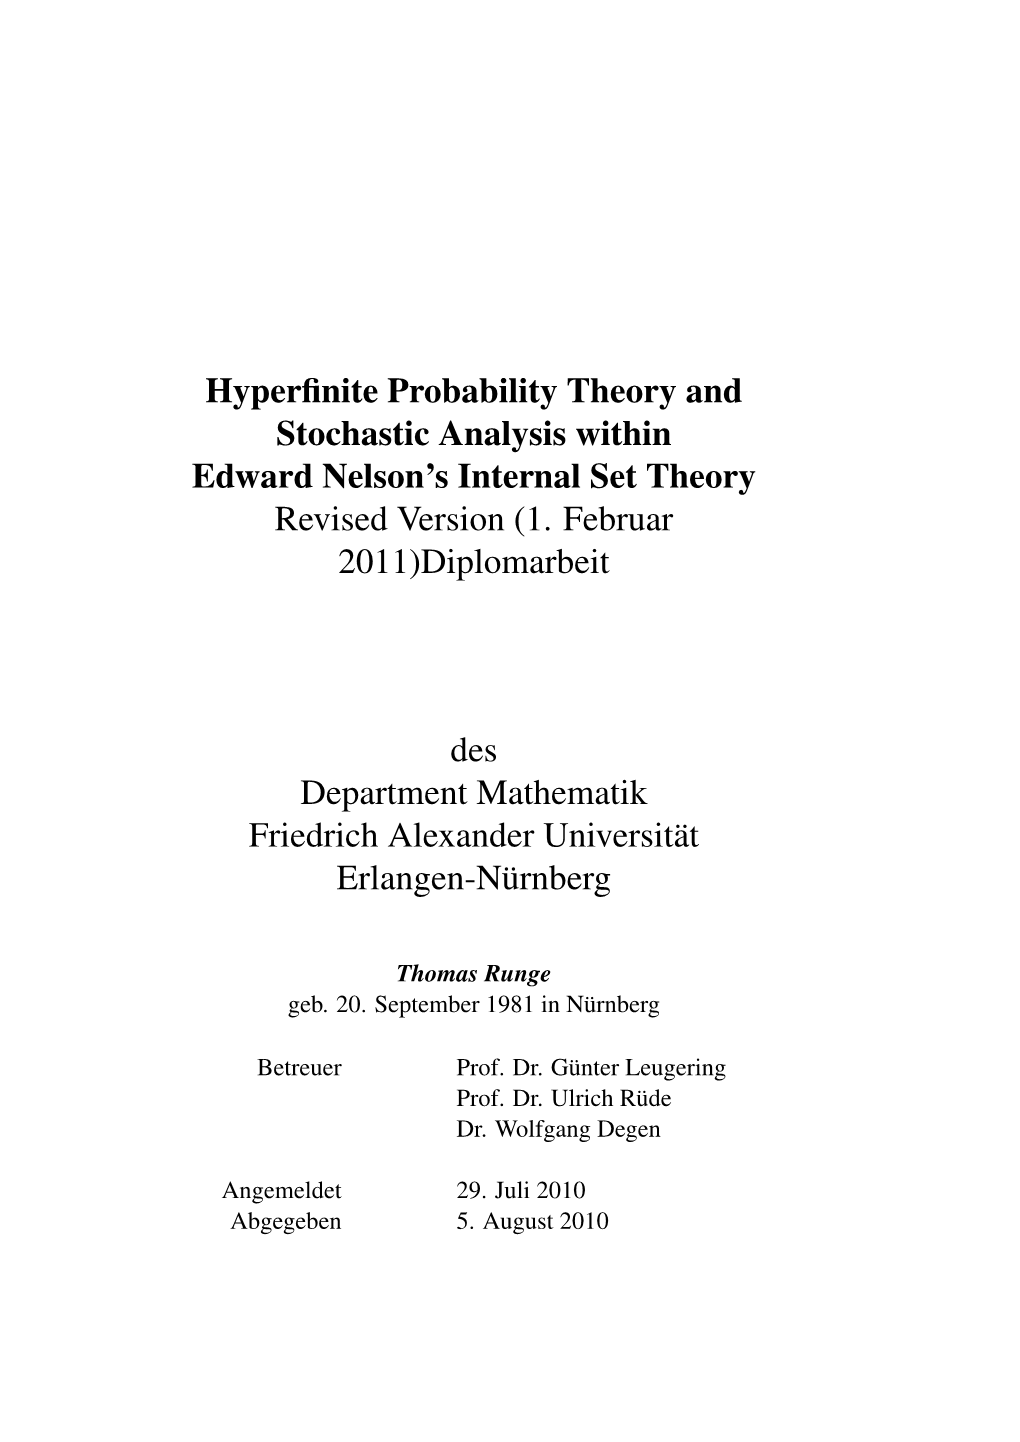 Hyperfinite Probability Theory and Stochastic Analysis Within Edward Nelson's Internal Set Theory Revised Version (1. Februar